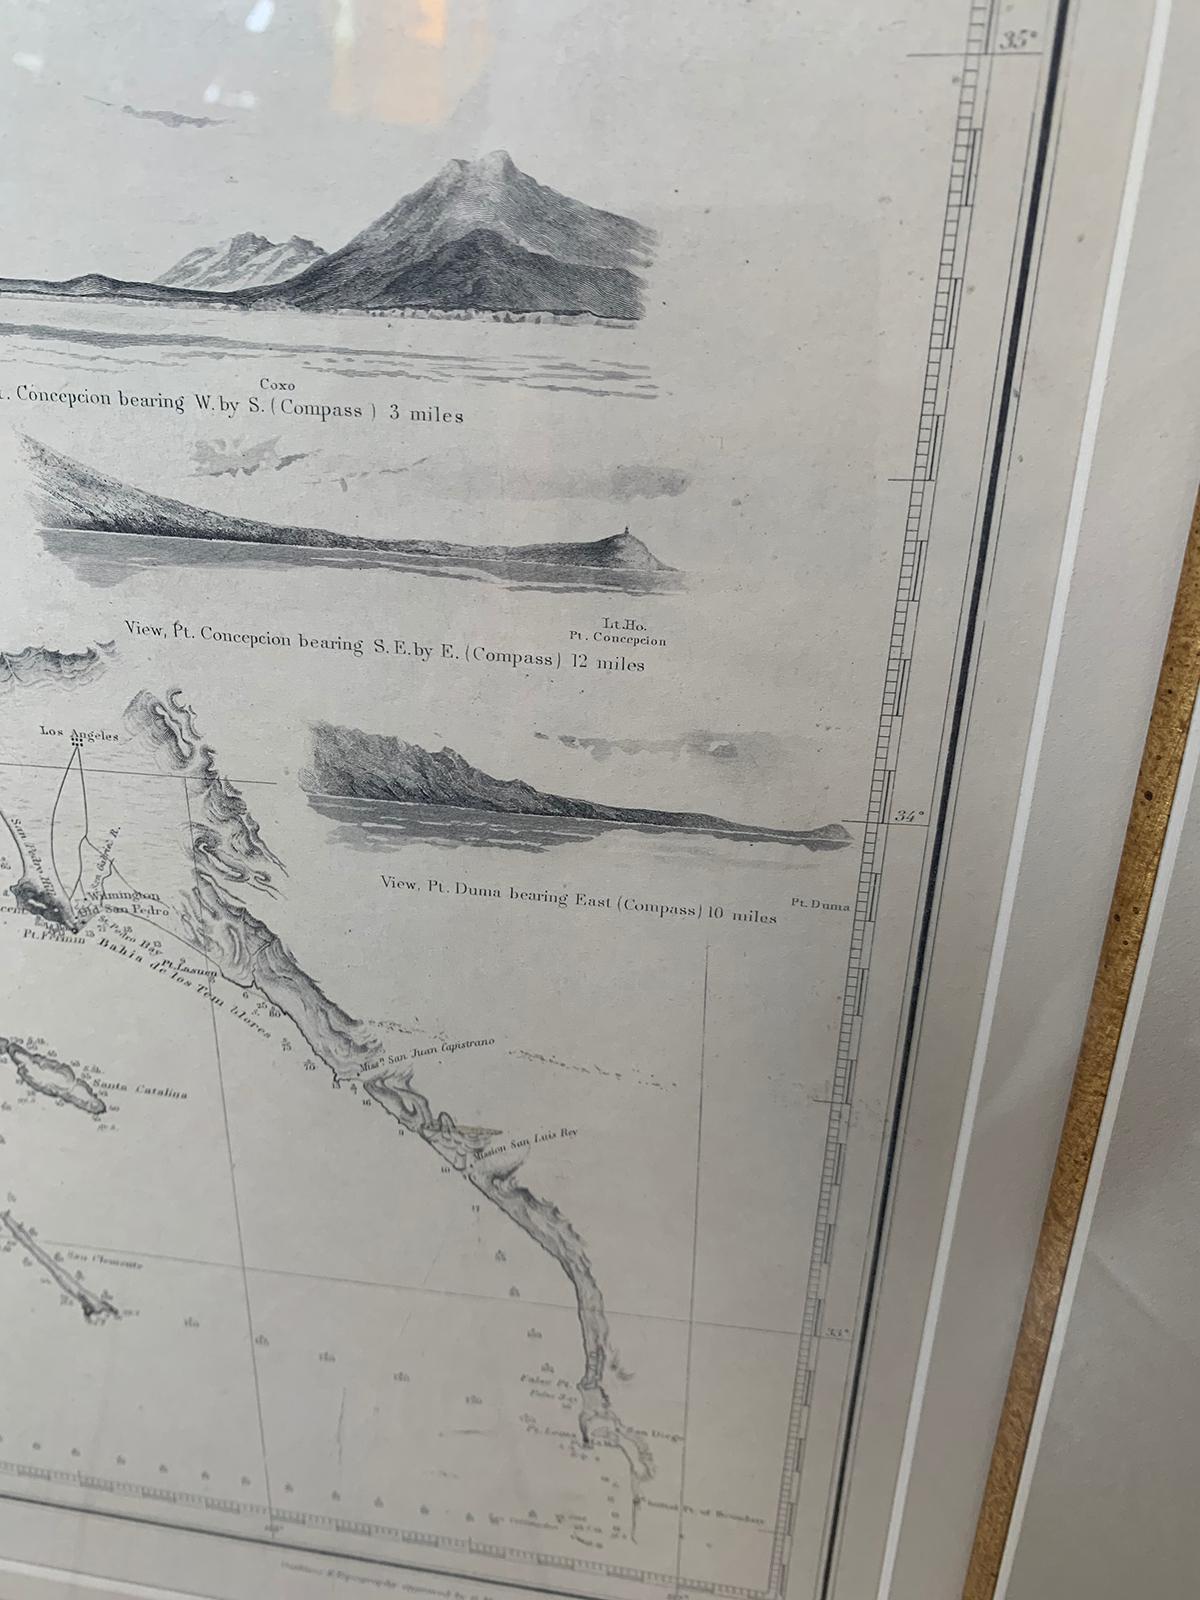 Print of Reconnaissance of the West Coast of U.S. San Francisco to San Diego Map 7